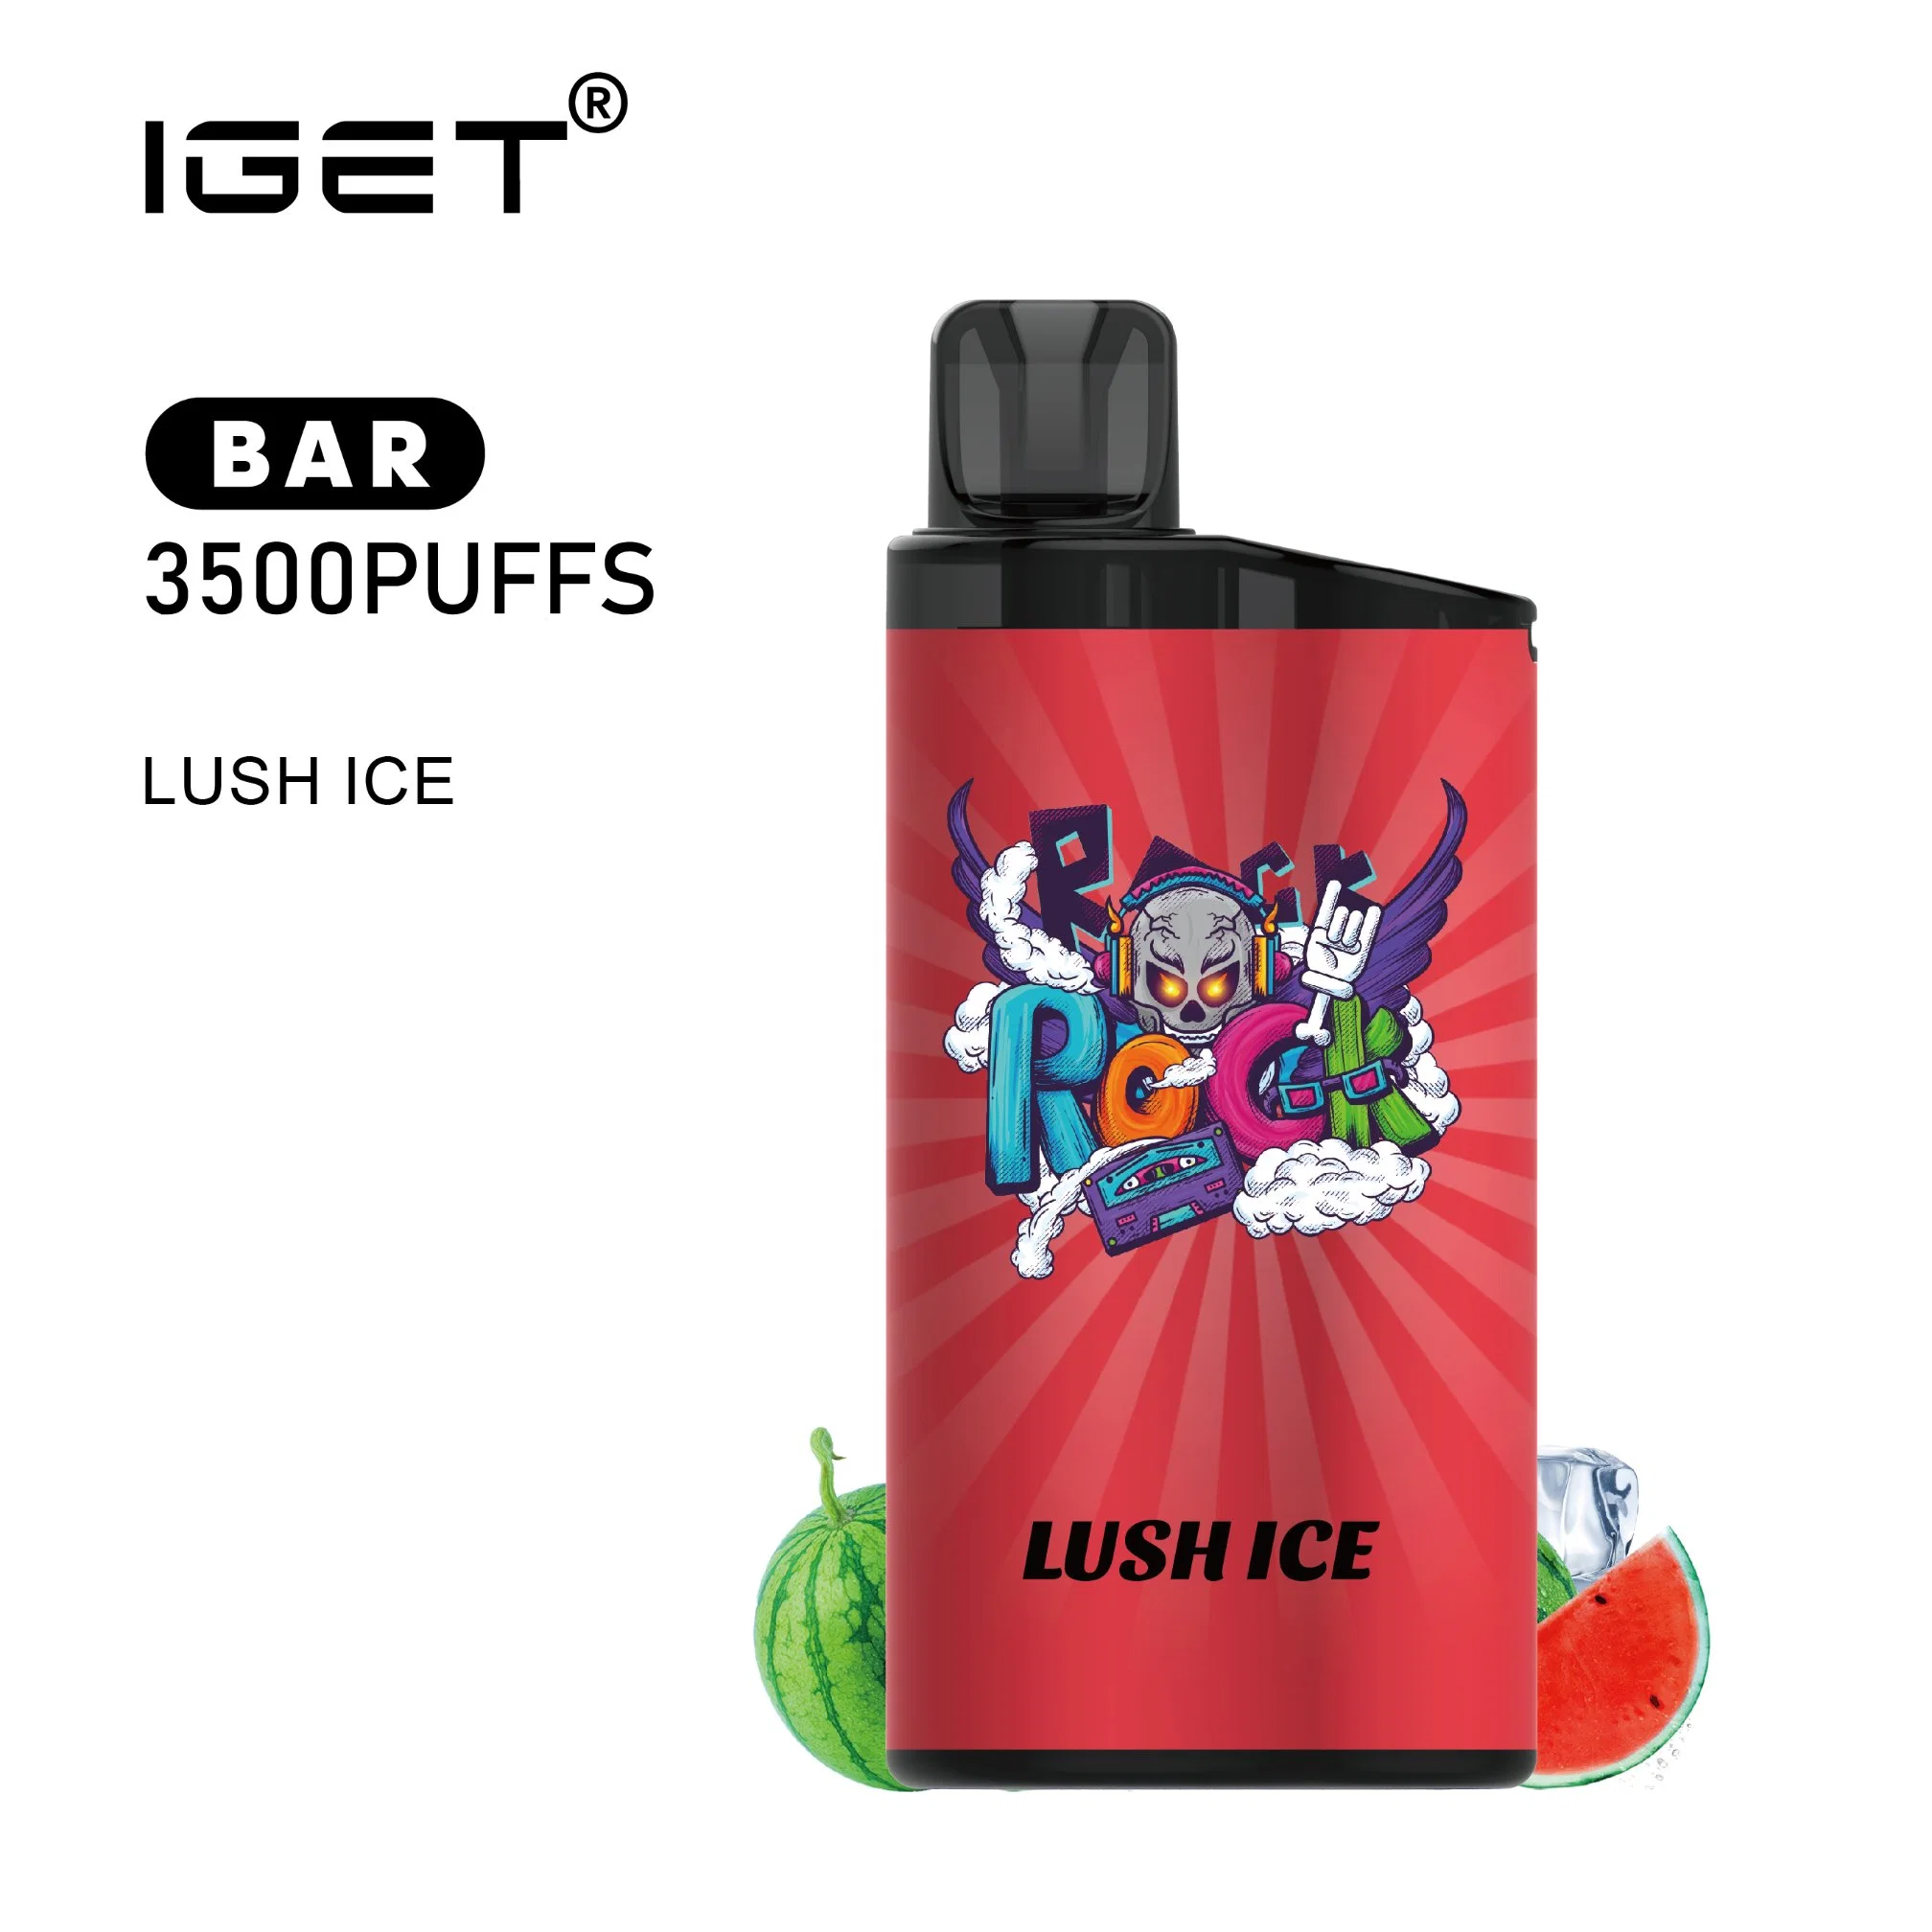 Iget Bar 3500puffs Hot Sale in Nz and Au